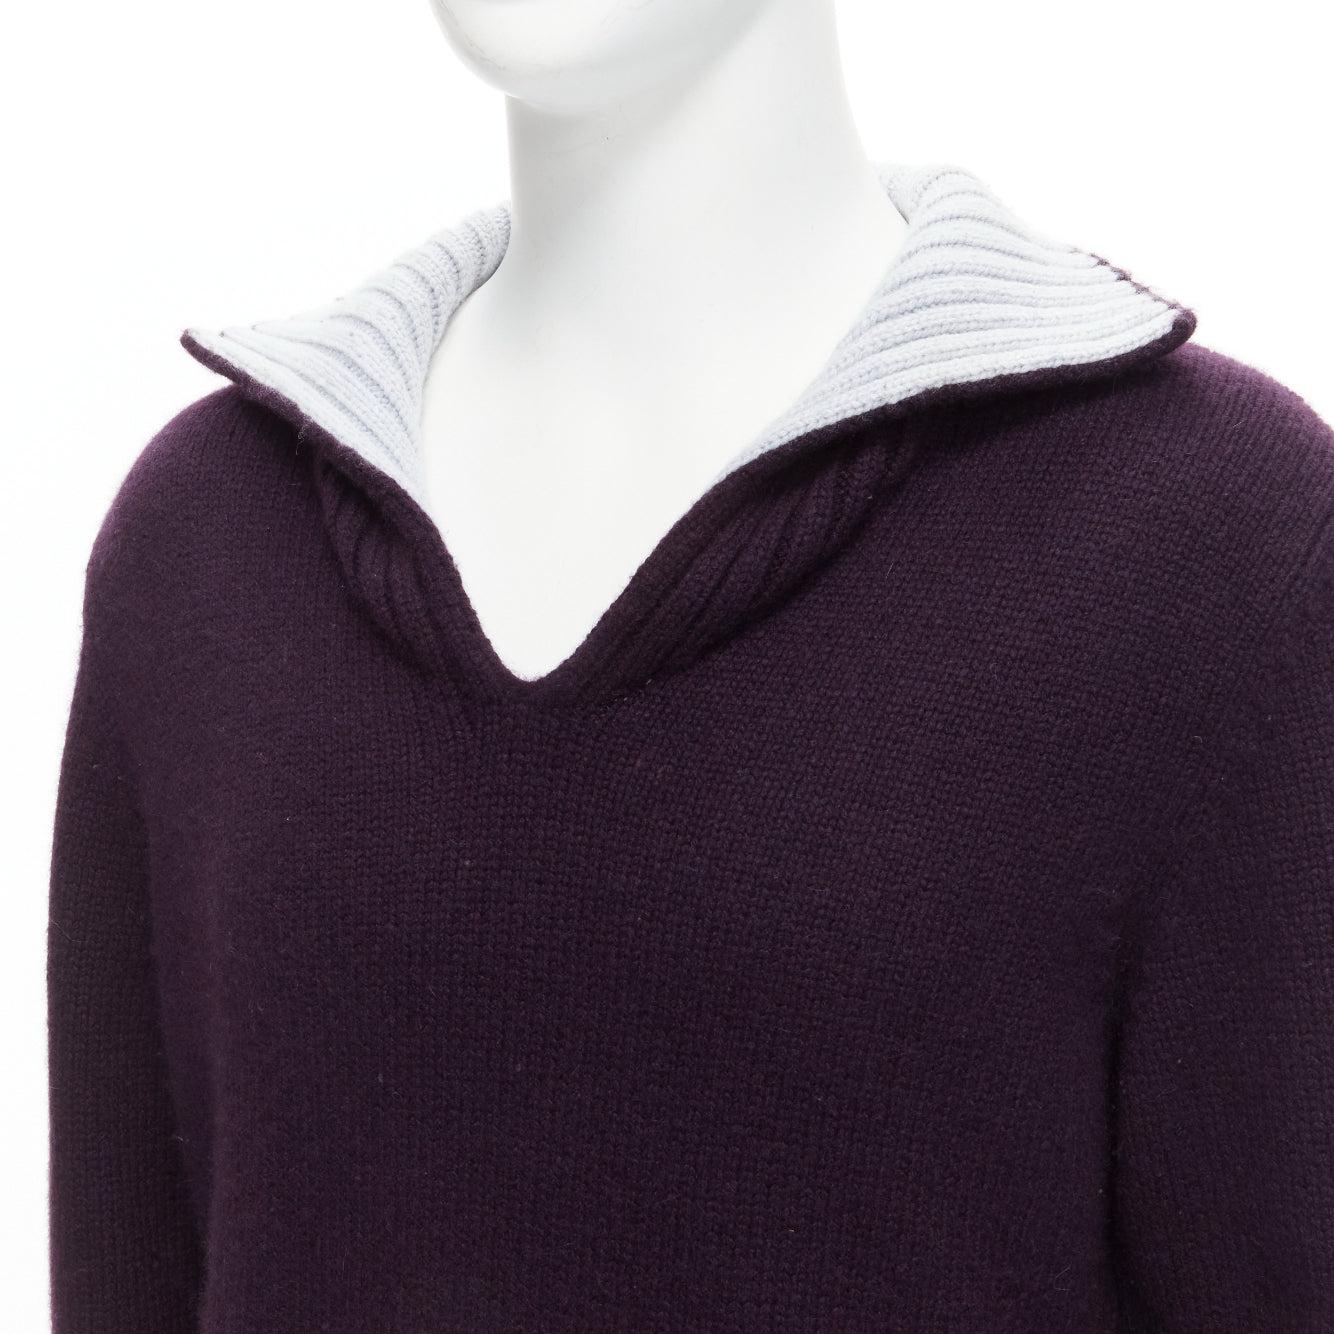 HERMES 100% cashmere dark purple contrasting baby blue collar pullover sweater M
Reference: YNWG/A00175
Brand: Hermes
Material: Cashmere
Color: Purple, Blue
Pattern: Solid
Closure: Slip On
Extra Details: Plum purple contrasting baby blue.
Made in: